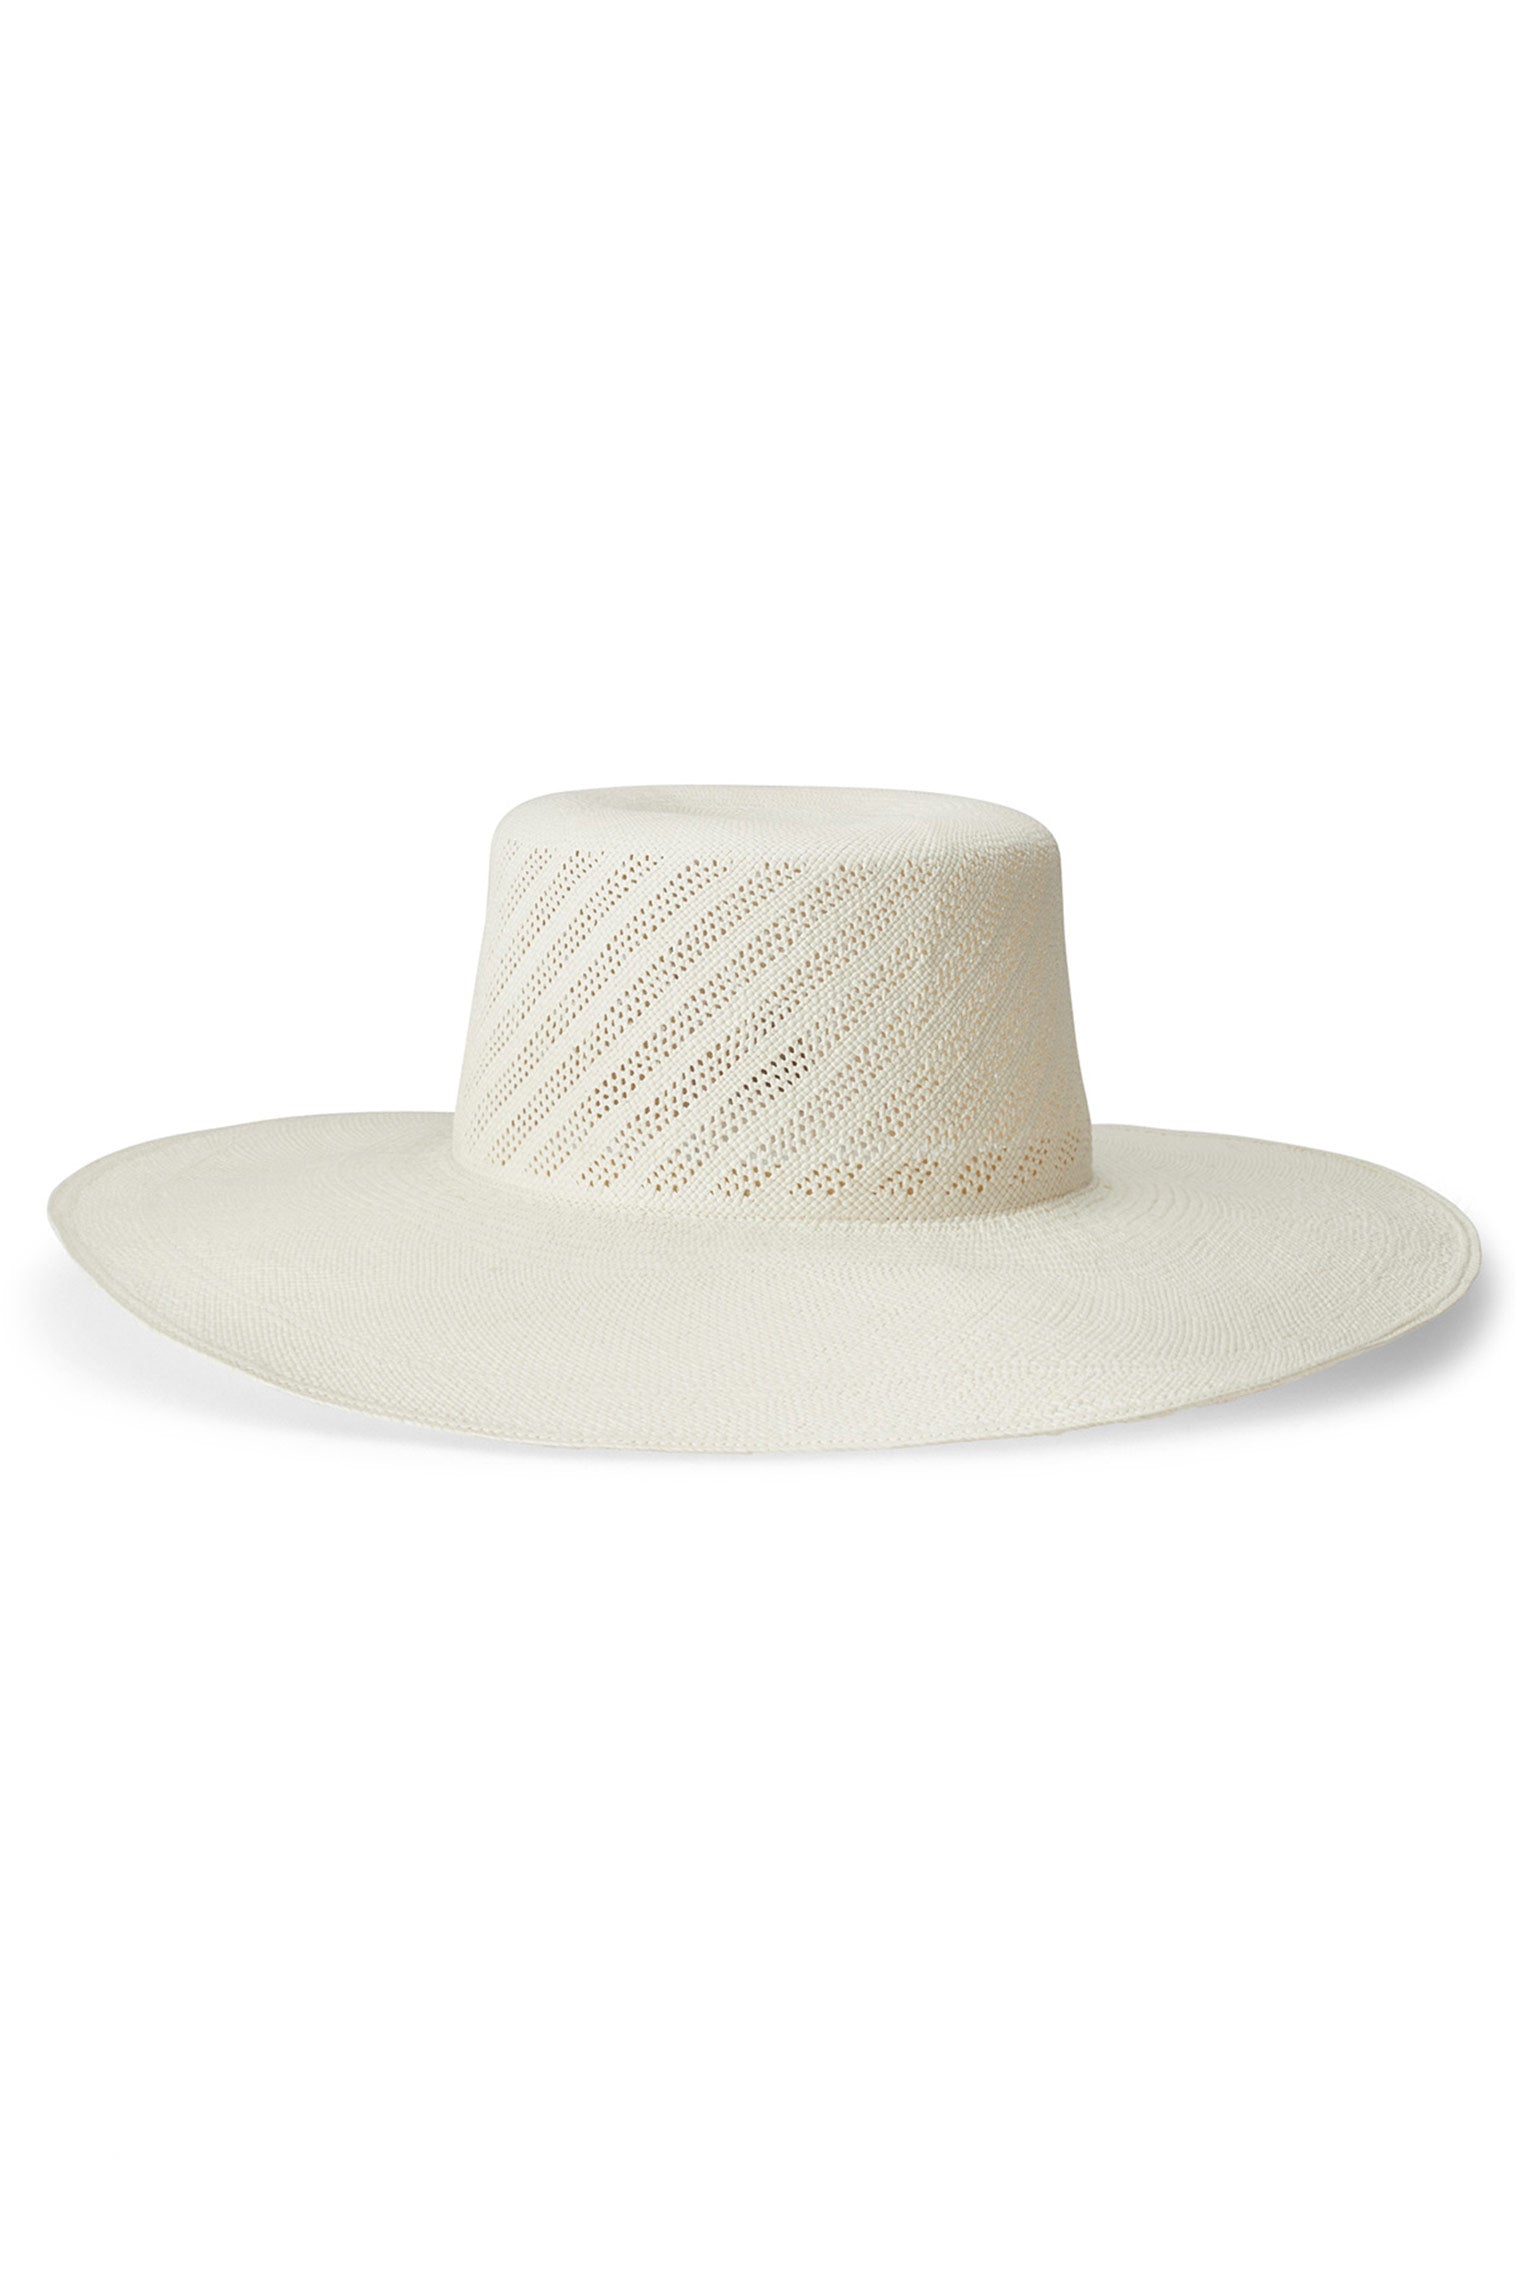 The Andrea - Limited Edition Collection - Lock & Co. Hatters London UK